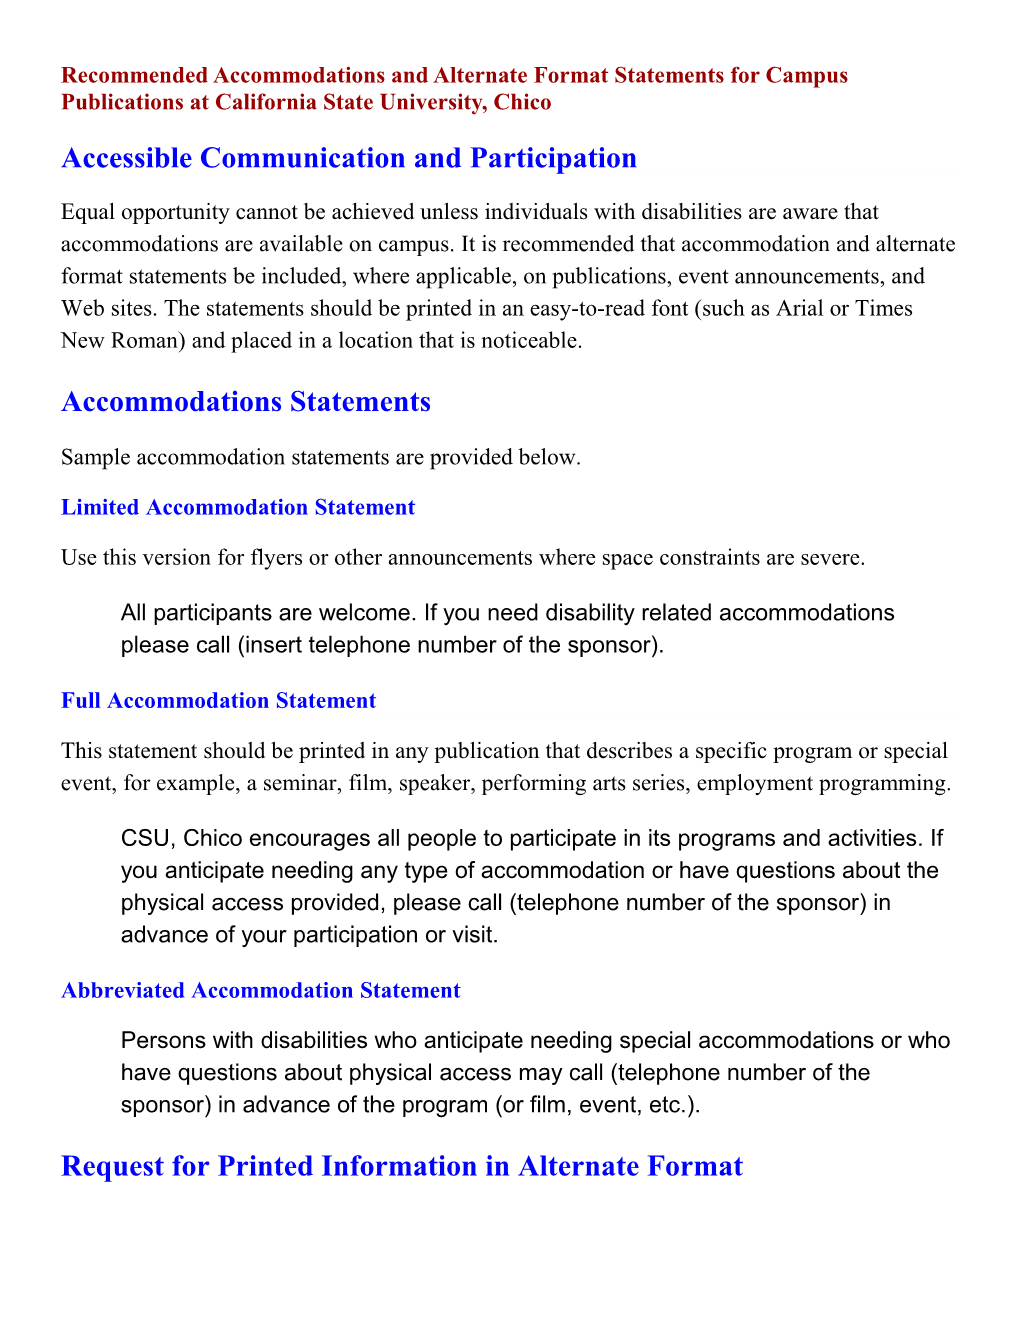 Recommended Accommodations and Alternate Format Statements for Publications